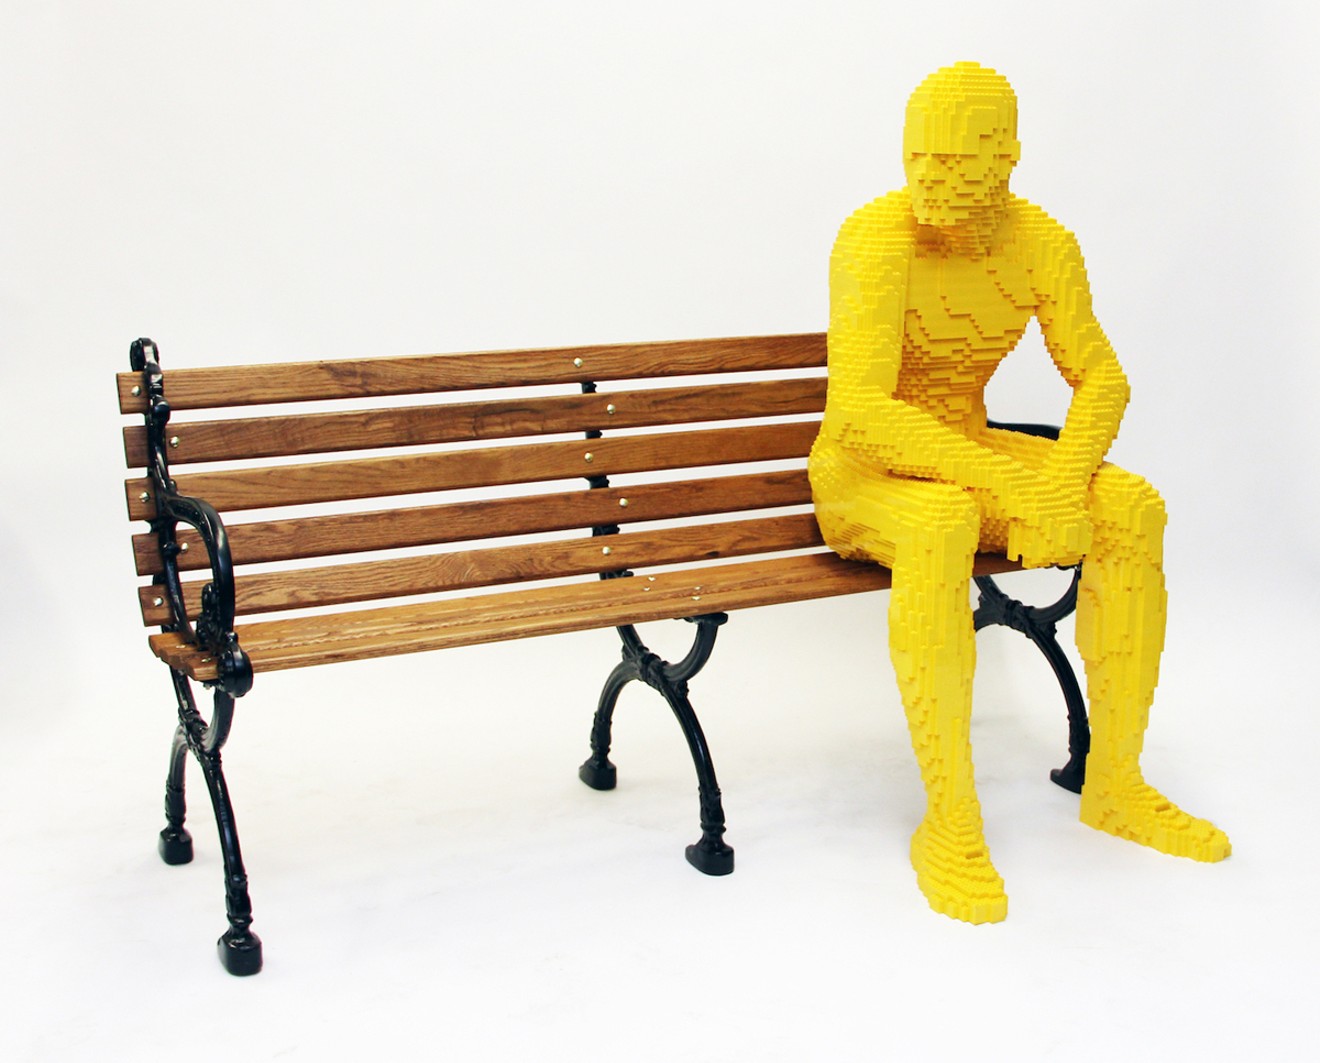 Nathan Sawaya's work will be on display as part of The Art of the Brick.